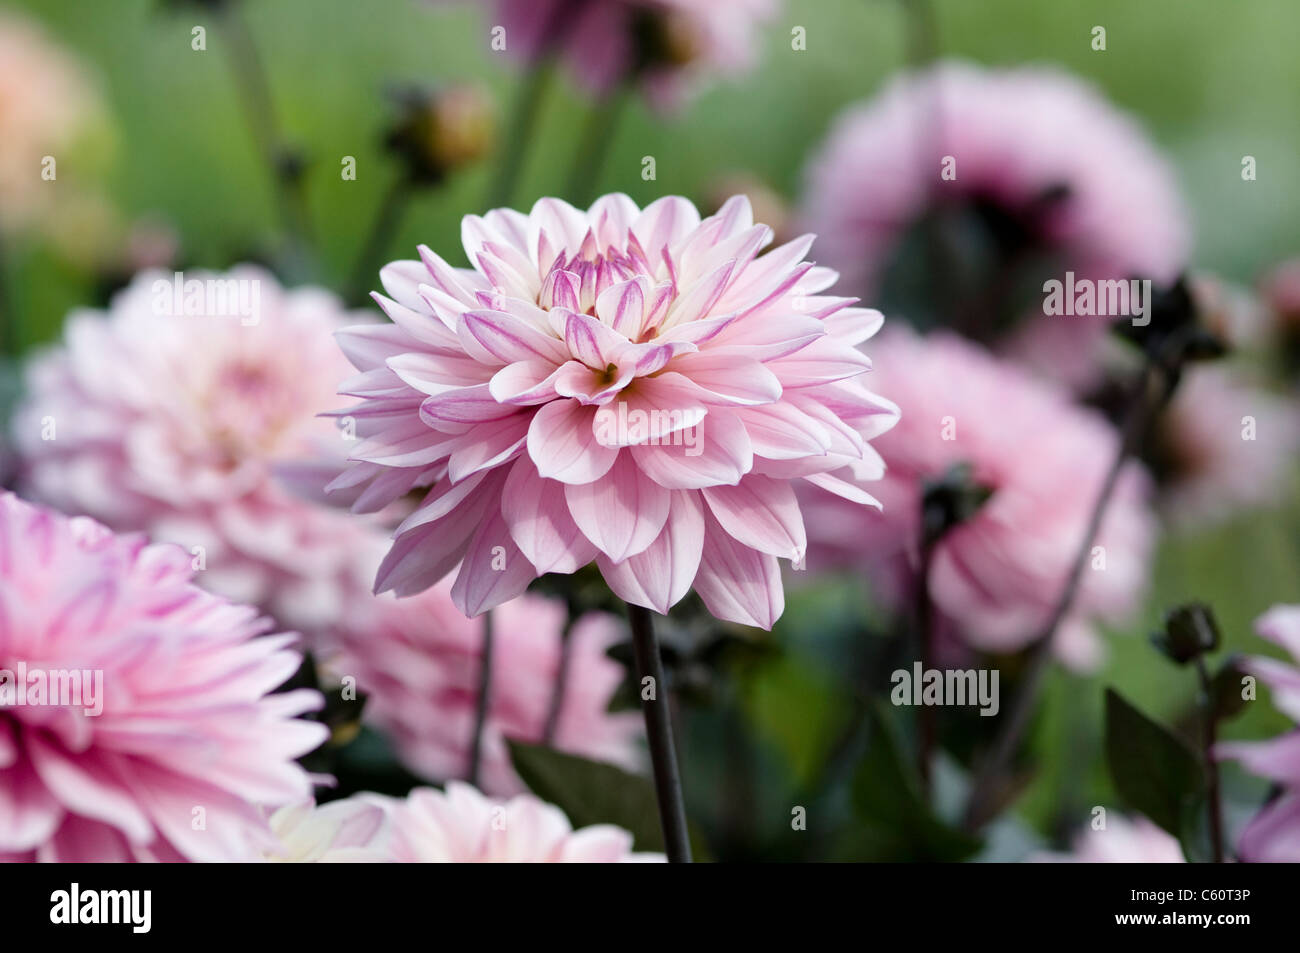 HARMONY MELODY DAHLIA Banque D'Images